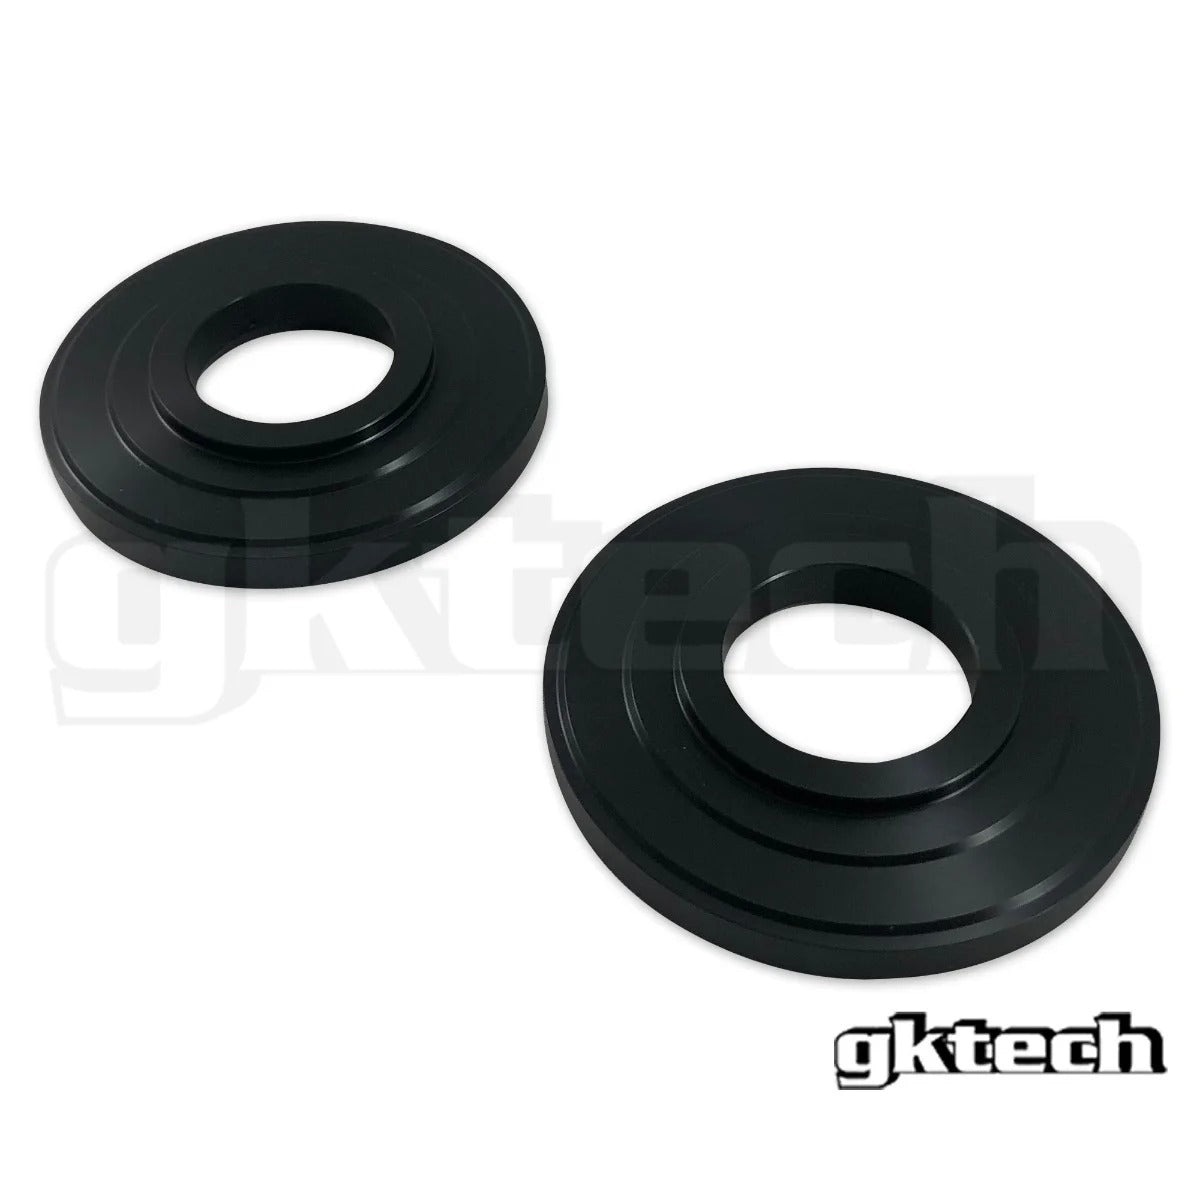 V2 Axle Spacers (5mm, 10mm or 15mm) - Pair